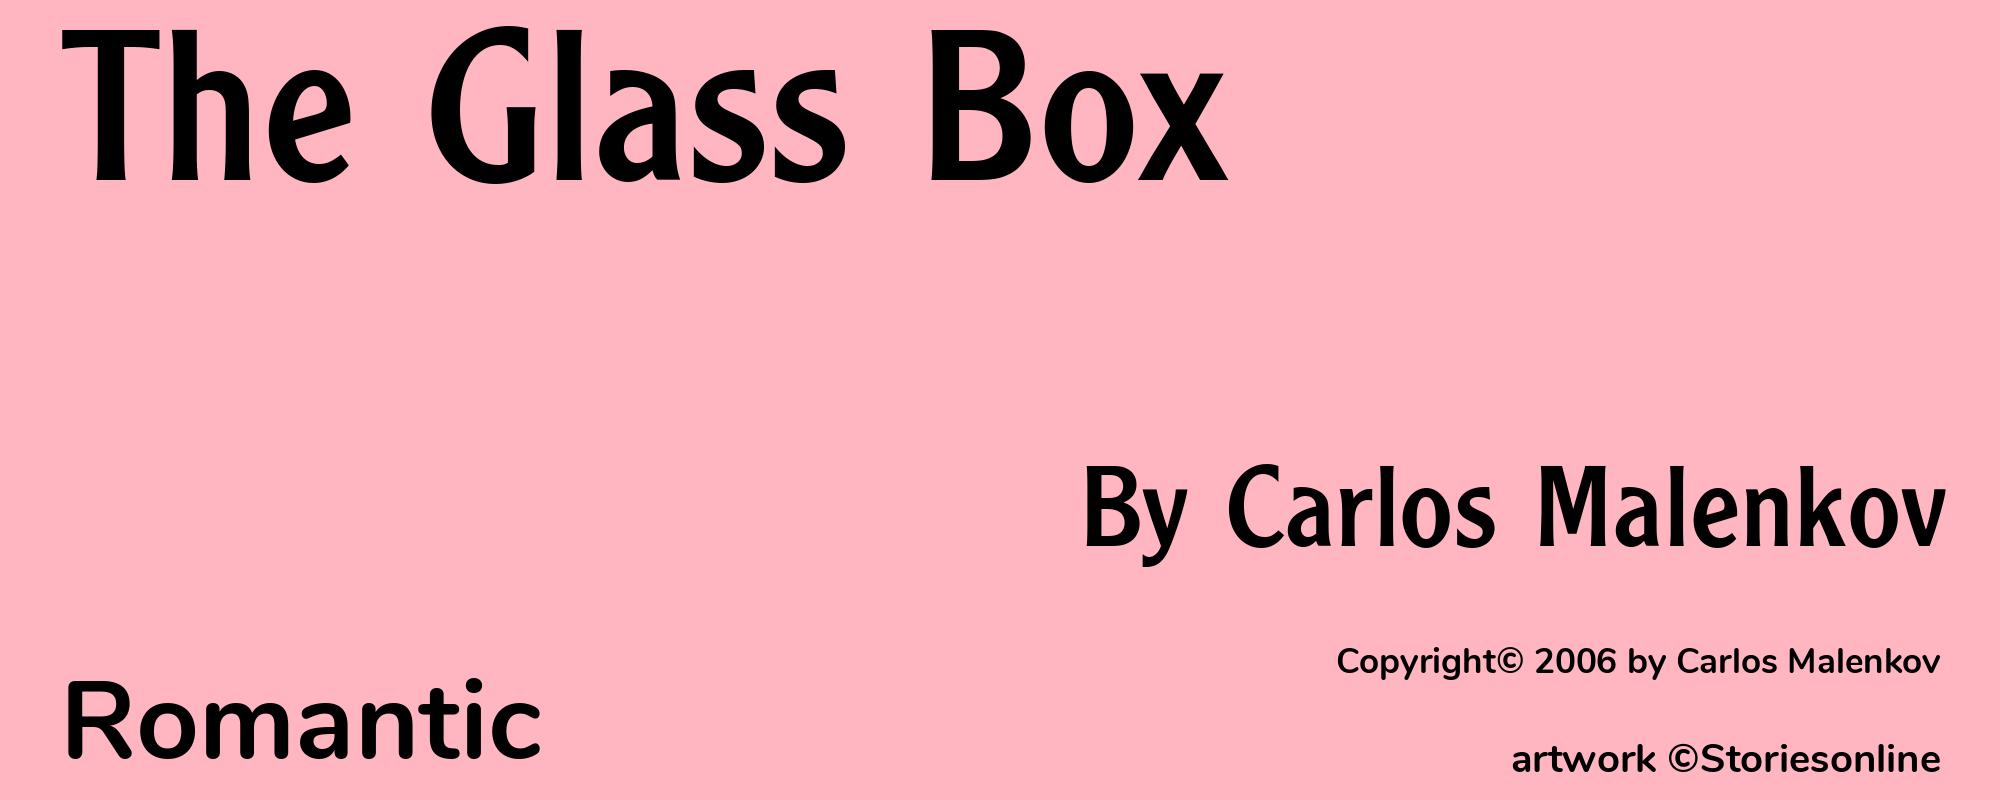 The Glass Box - Cover